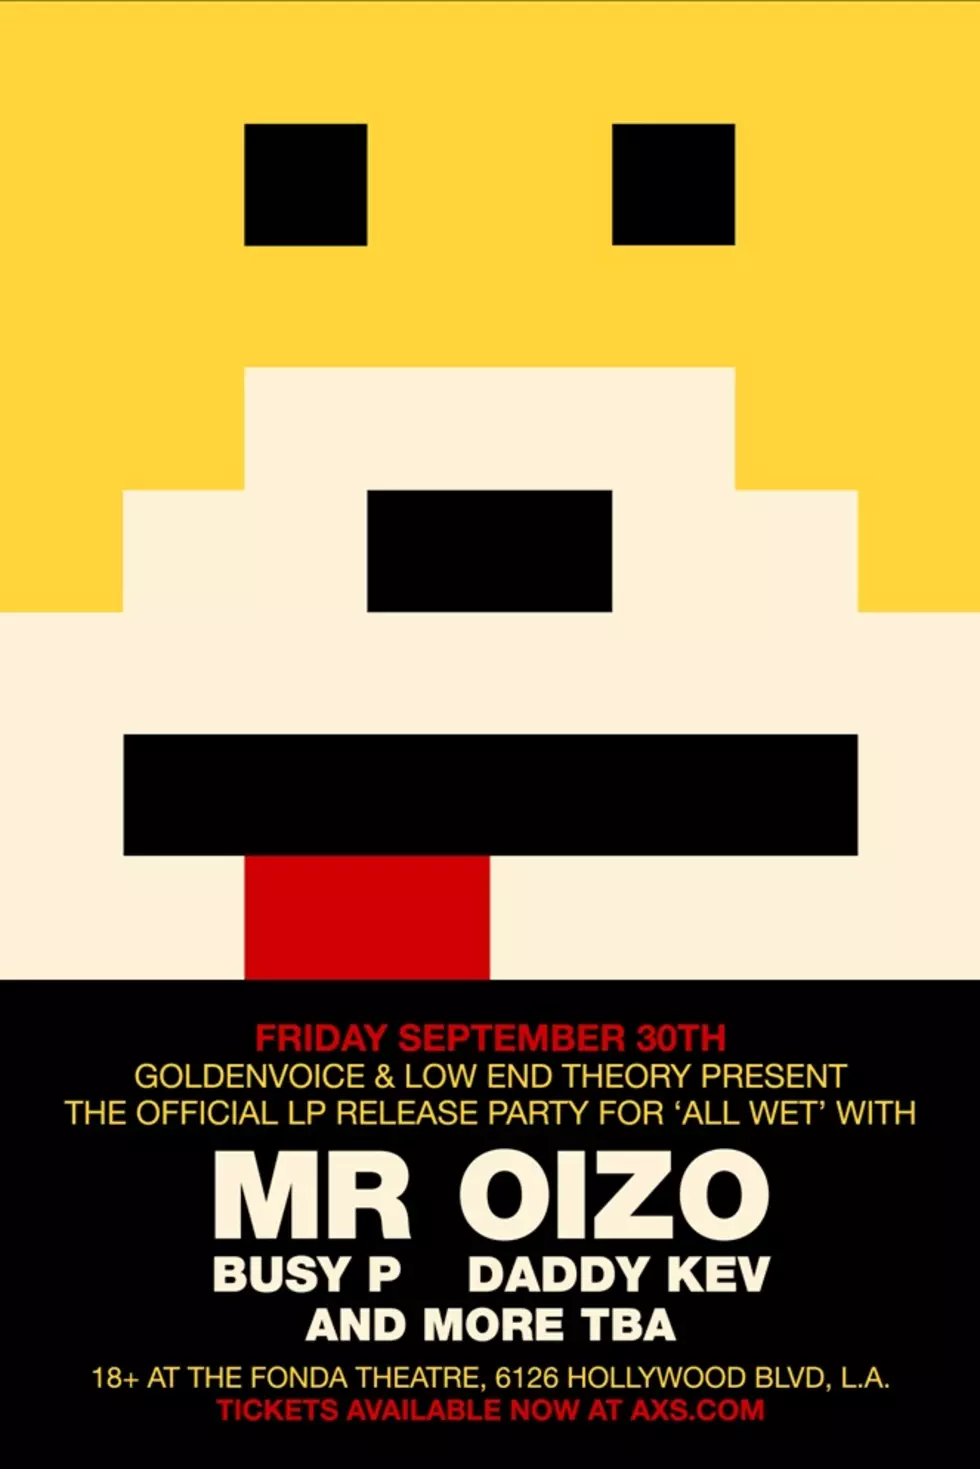 Ed Banger Takes Over LA with Mr. Oizo “All Wet” LP Release Party